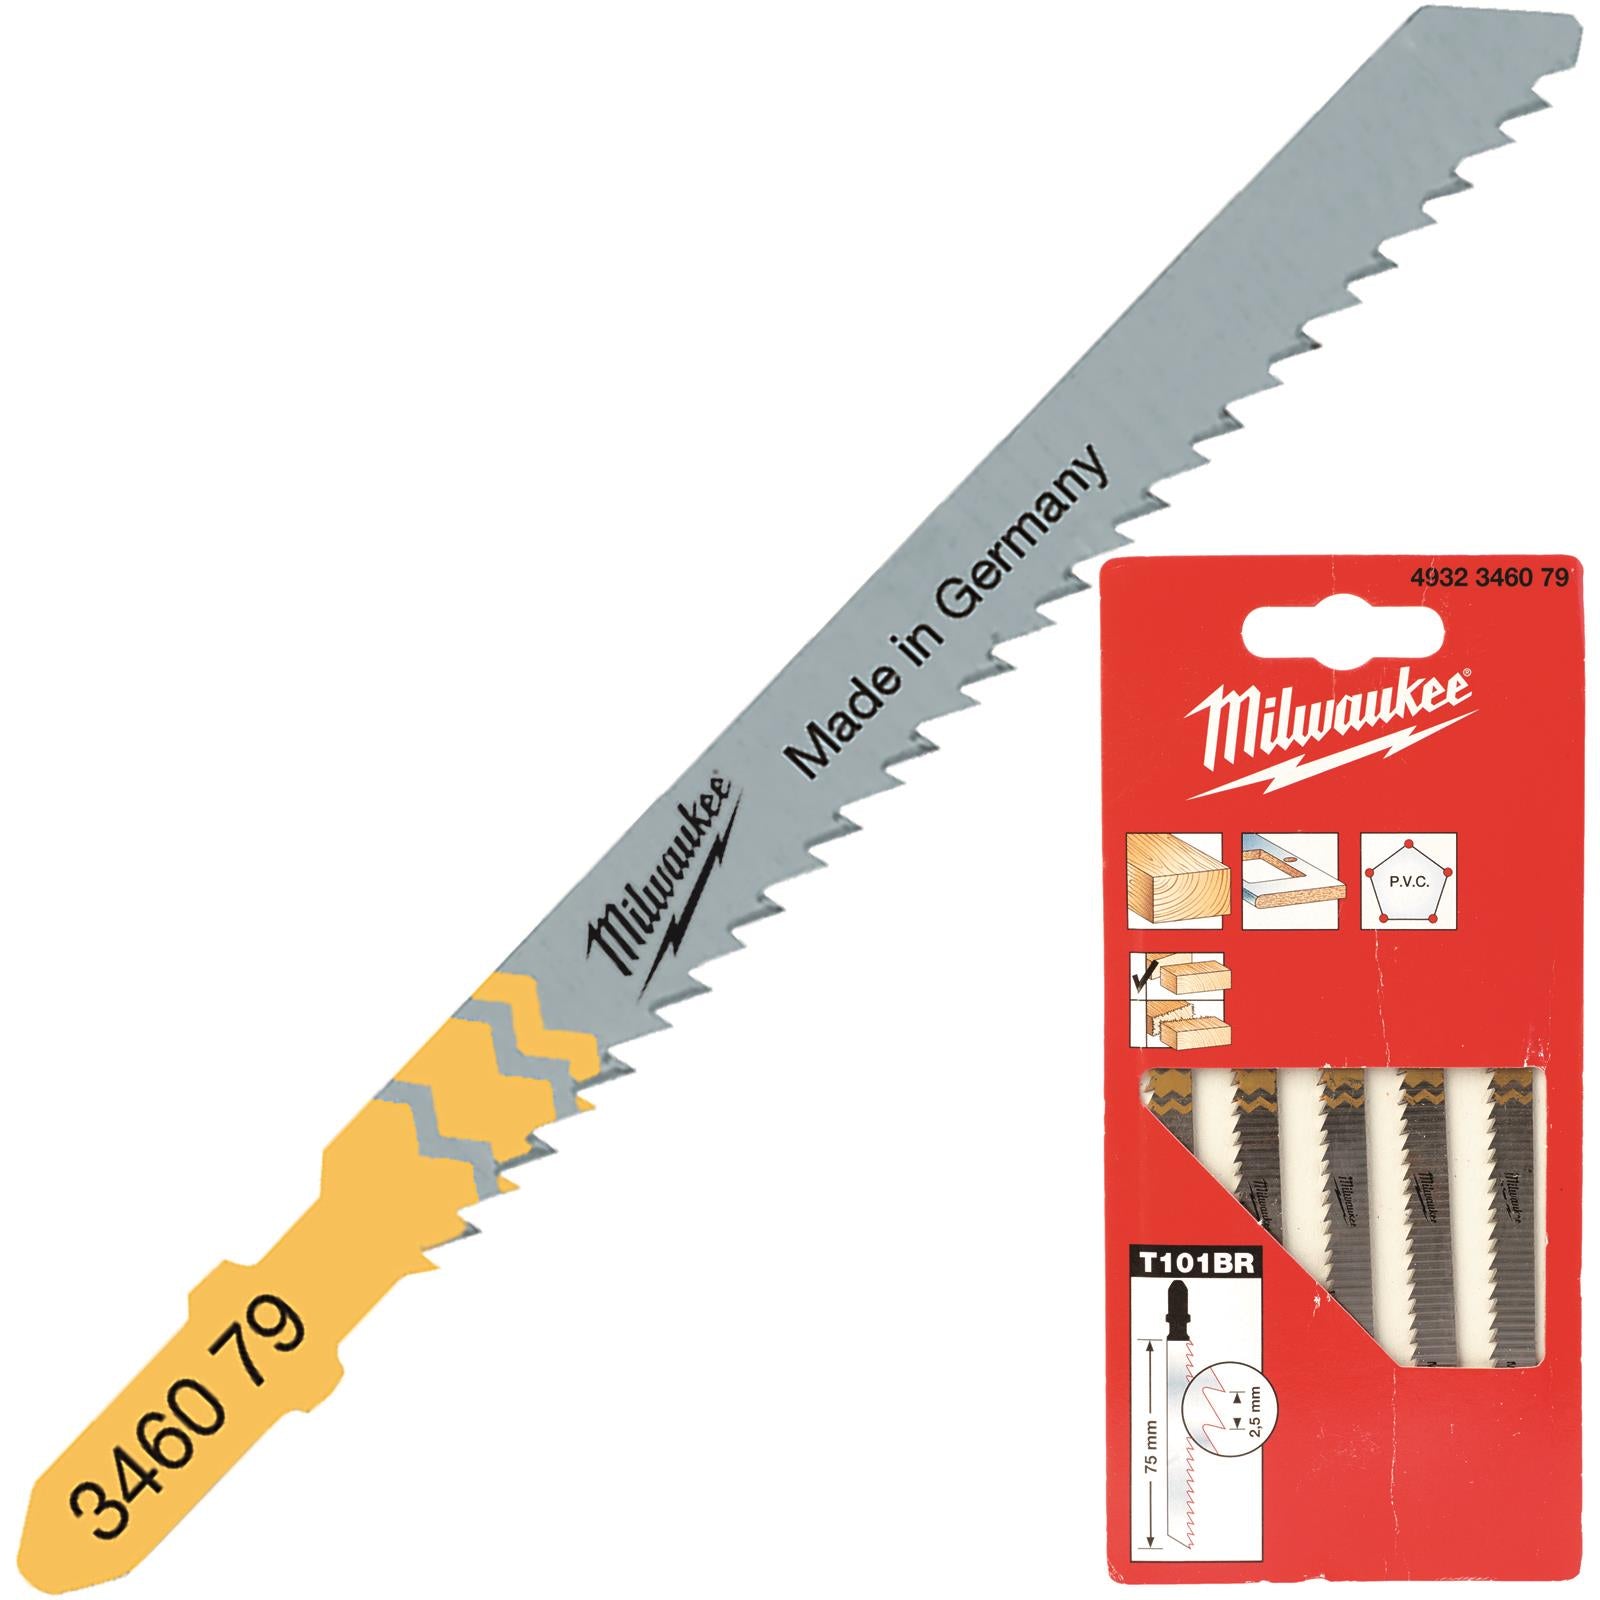 Milwaukee Jigsaw Blades Wood and Plastic 5 Pack Kitchen Worktops 75mm x 2.5mm T101BR